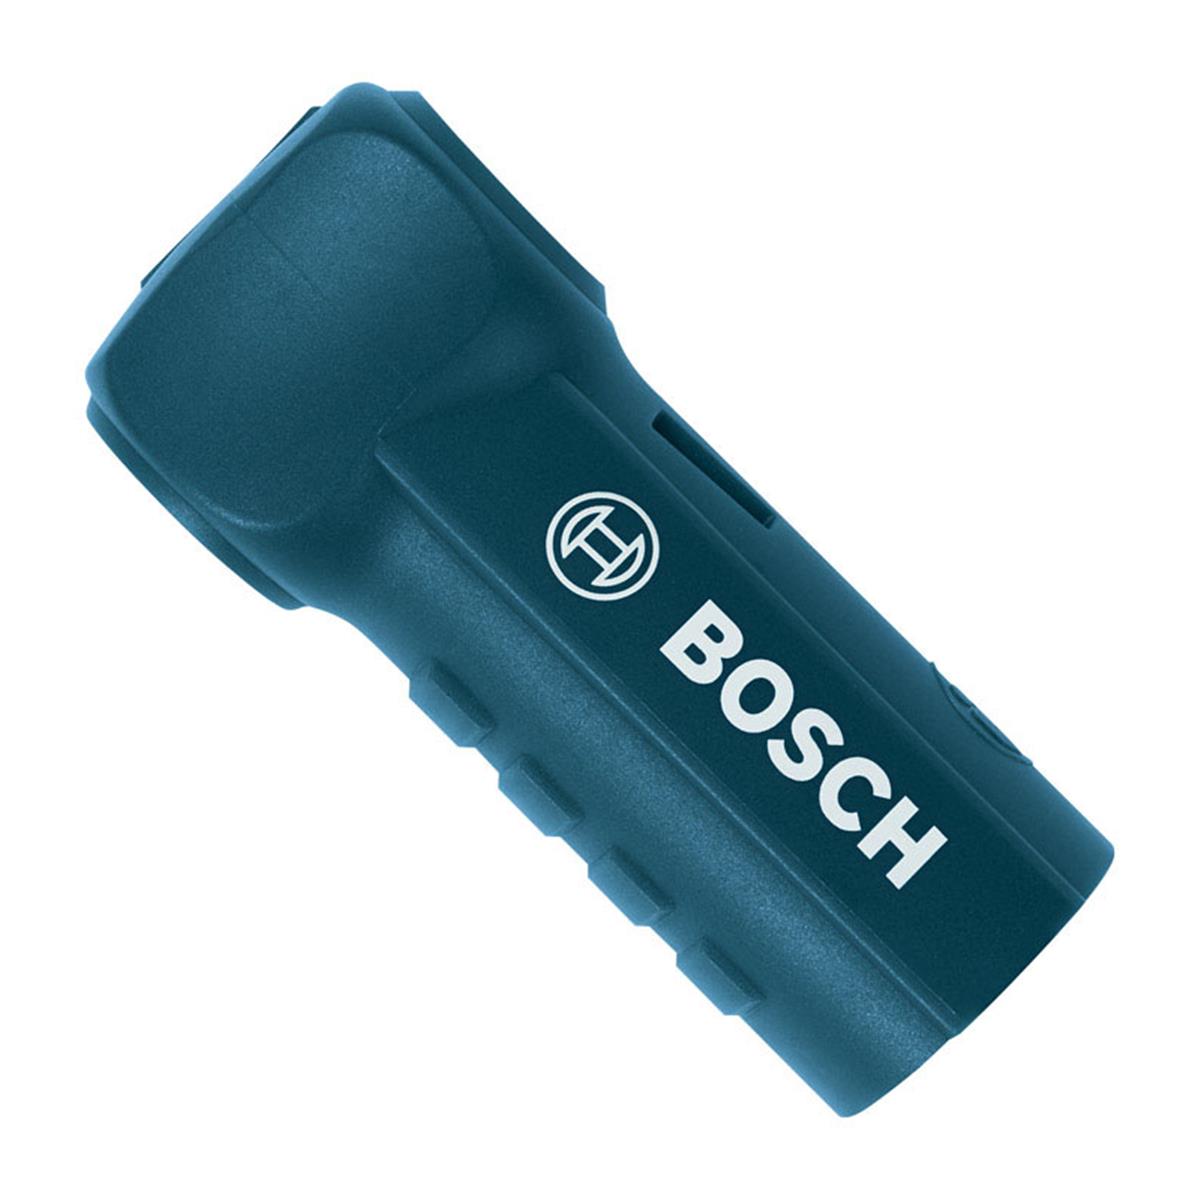 Picture of Bosch 2624724 35 mm x 4.25 in. SDS-Plus Speed Clean Hose Adapter - Teal